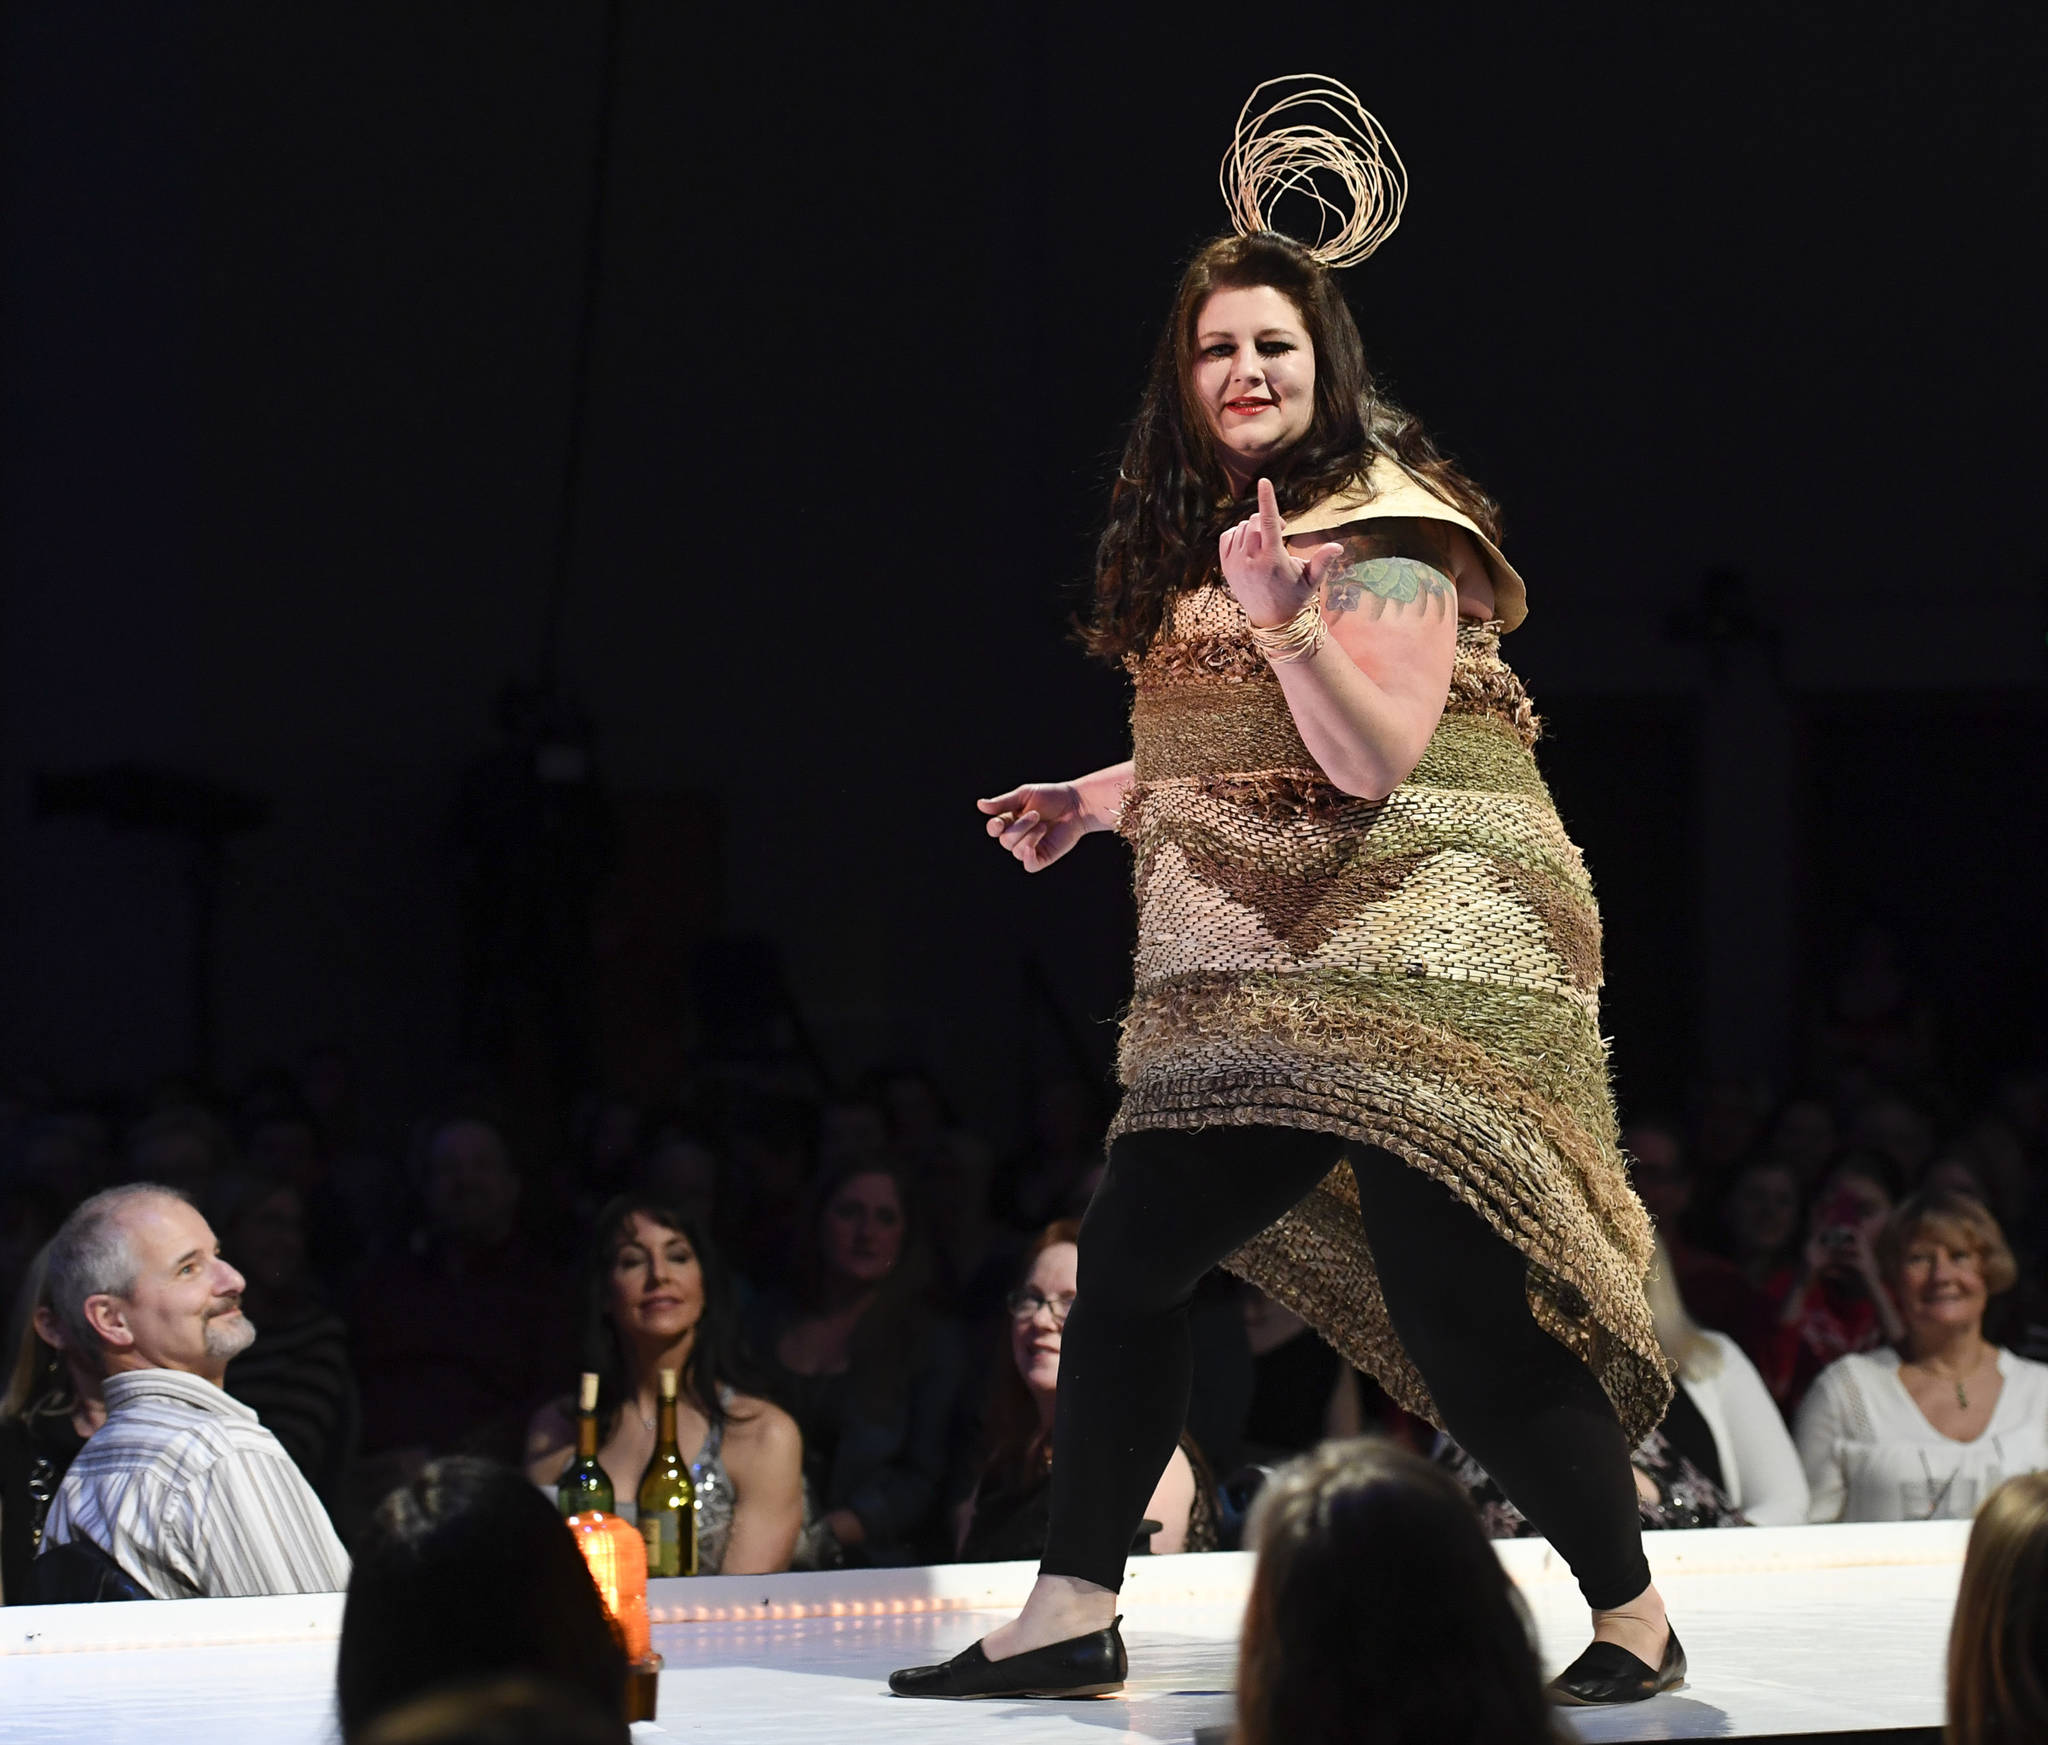 Jesse Riesenberger models Jessica Sullivan’s “Calm in the Wild” at the Wearable Art show at Centennial Hall on Saturday, Feb. 16, 2019. The entry placed third in the competition. (Michael Penn | Capital City Weekly)